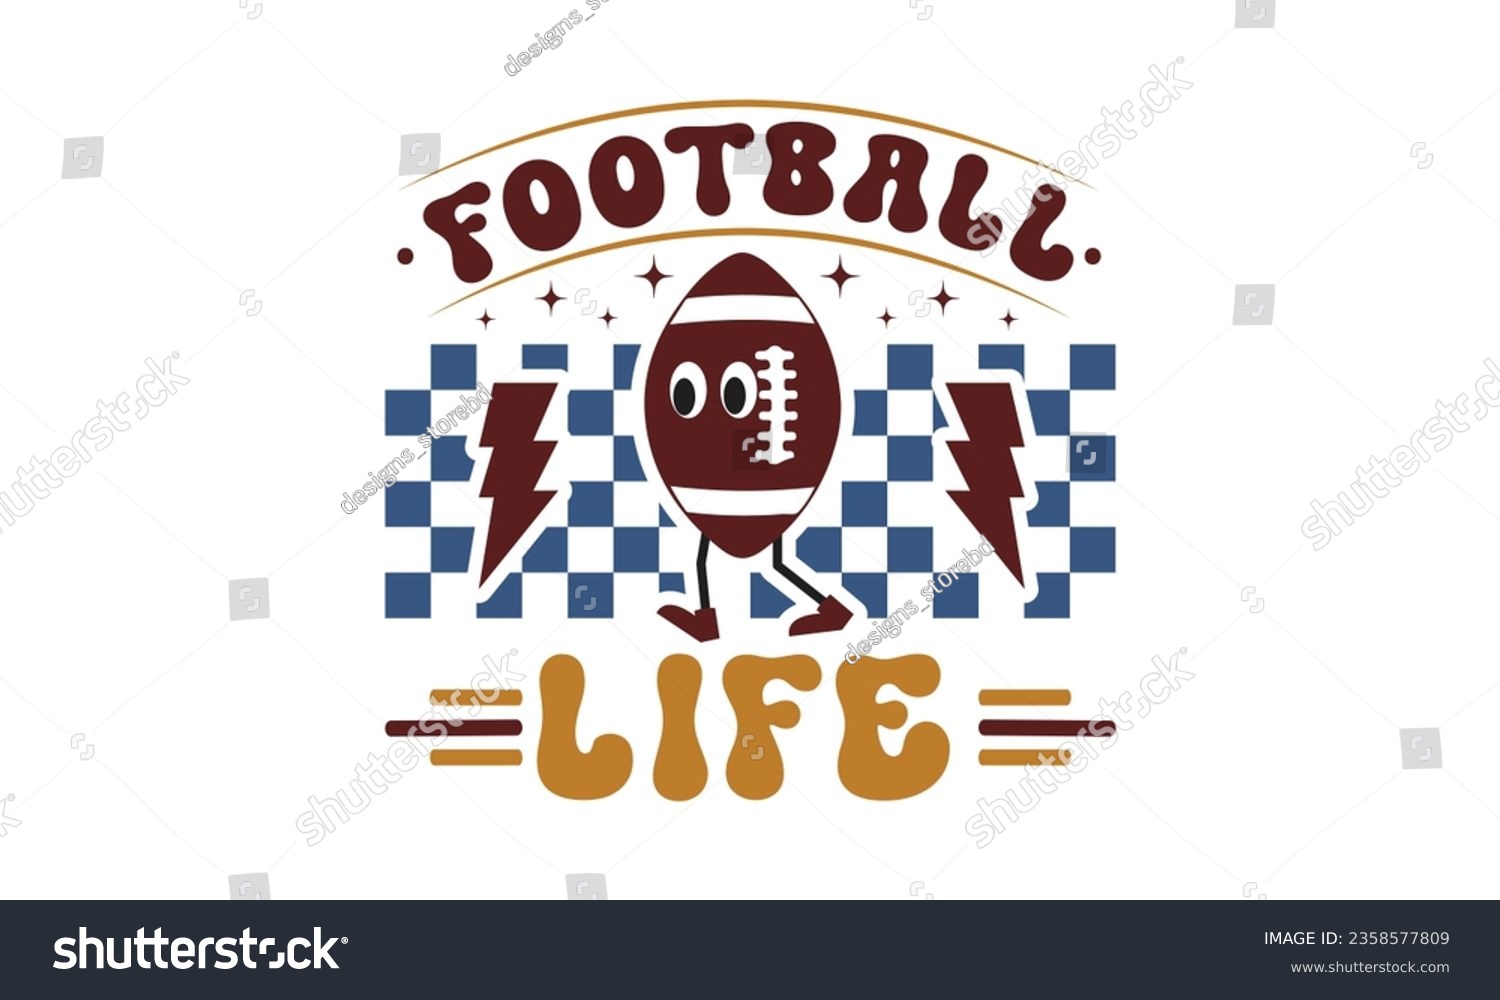 SVG of Football life svg, Football SVG, Football T-shirt Design Template SVG Cut File Typography, Files for Cutting Cricut and Silhouette Cut svg File, Game Day eps, png svg